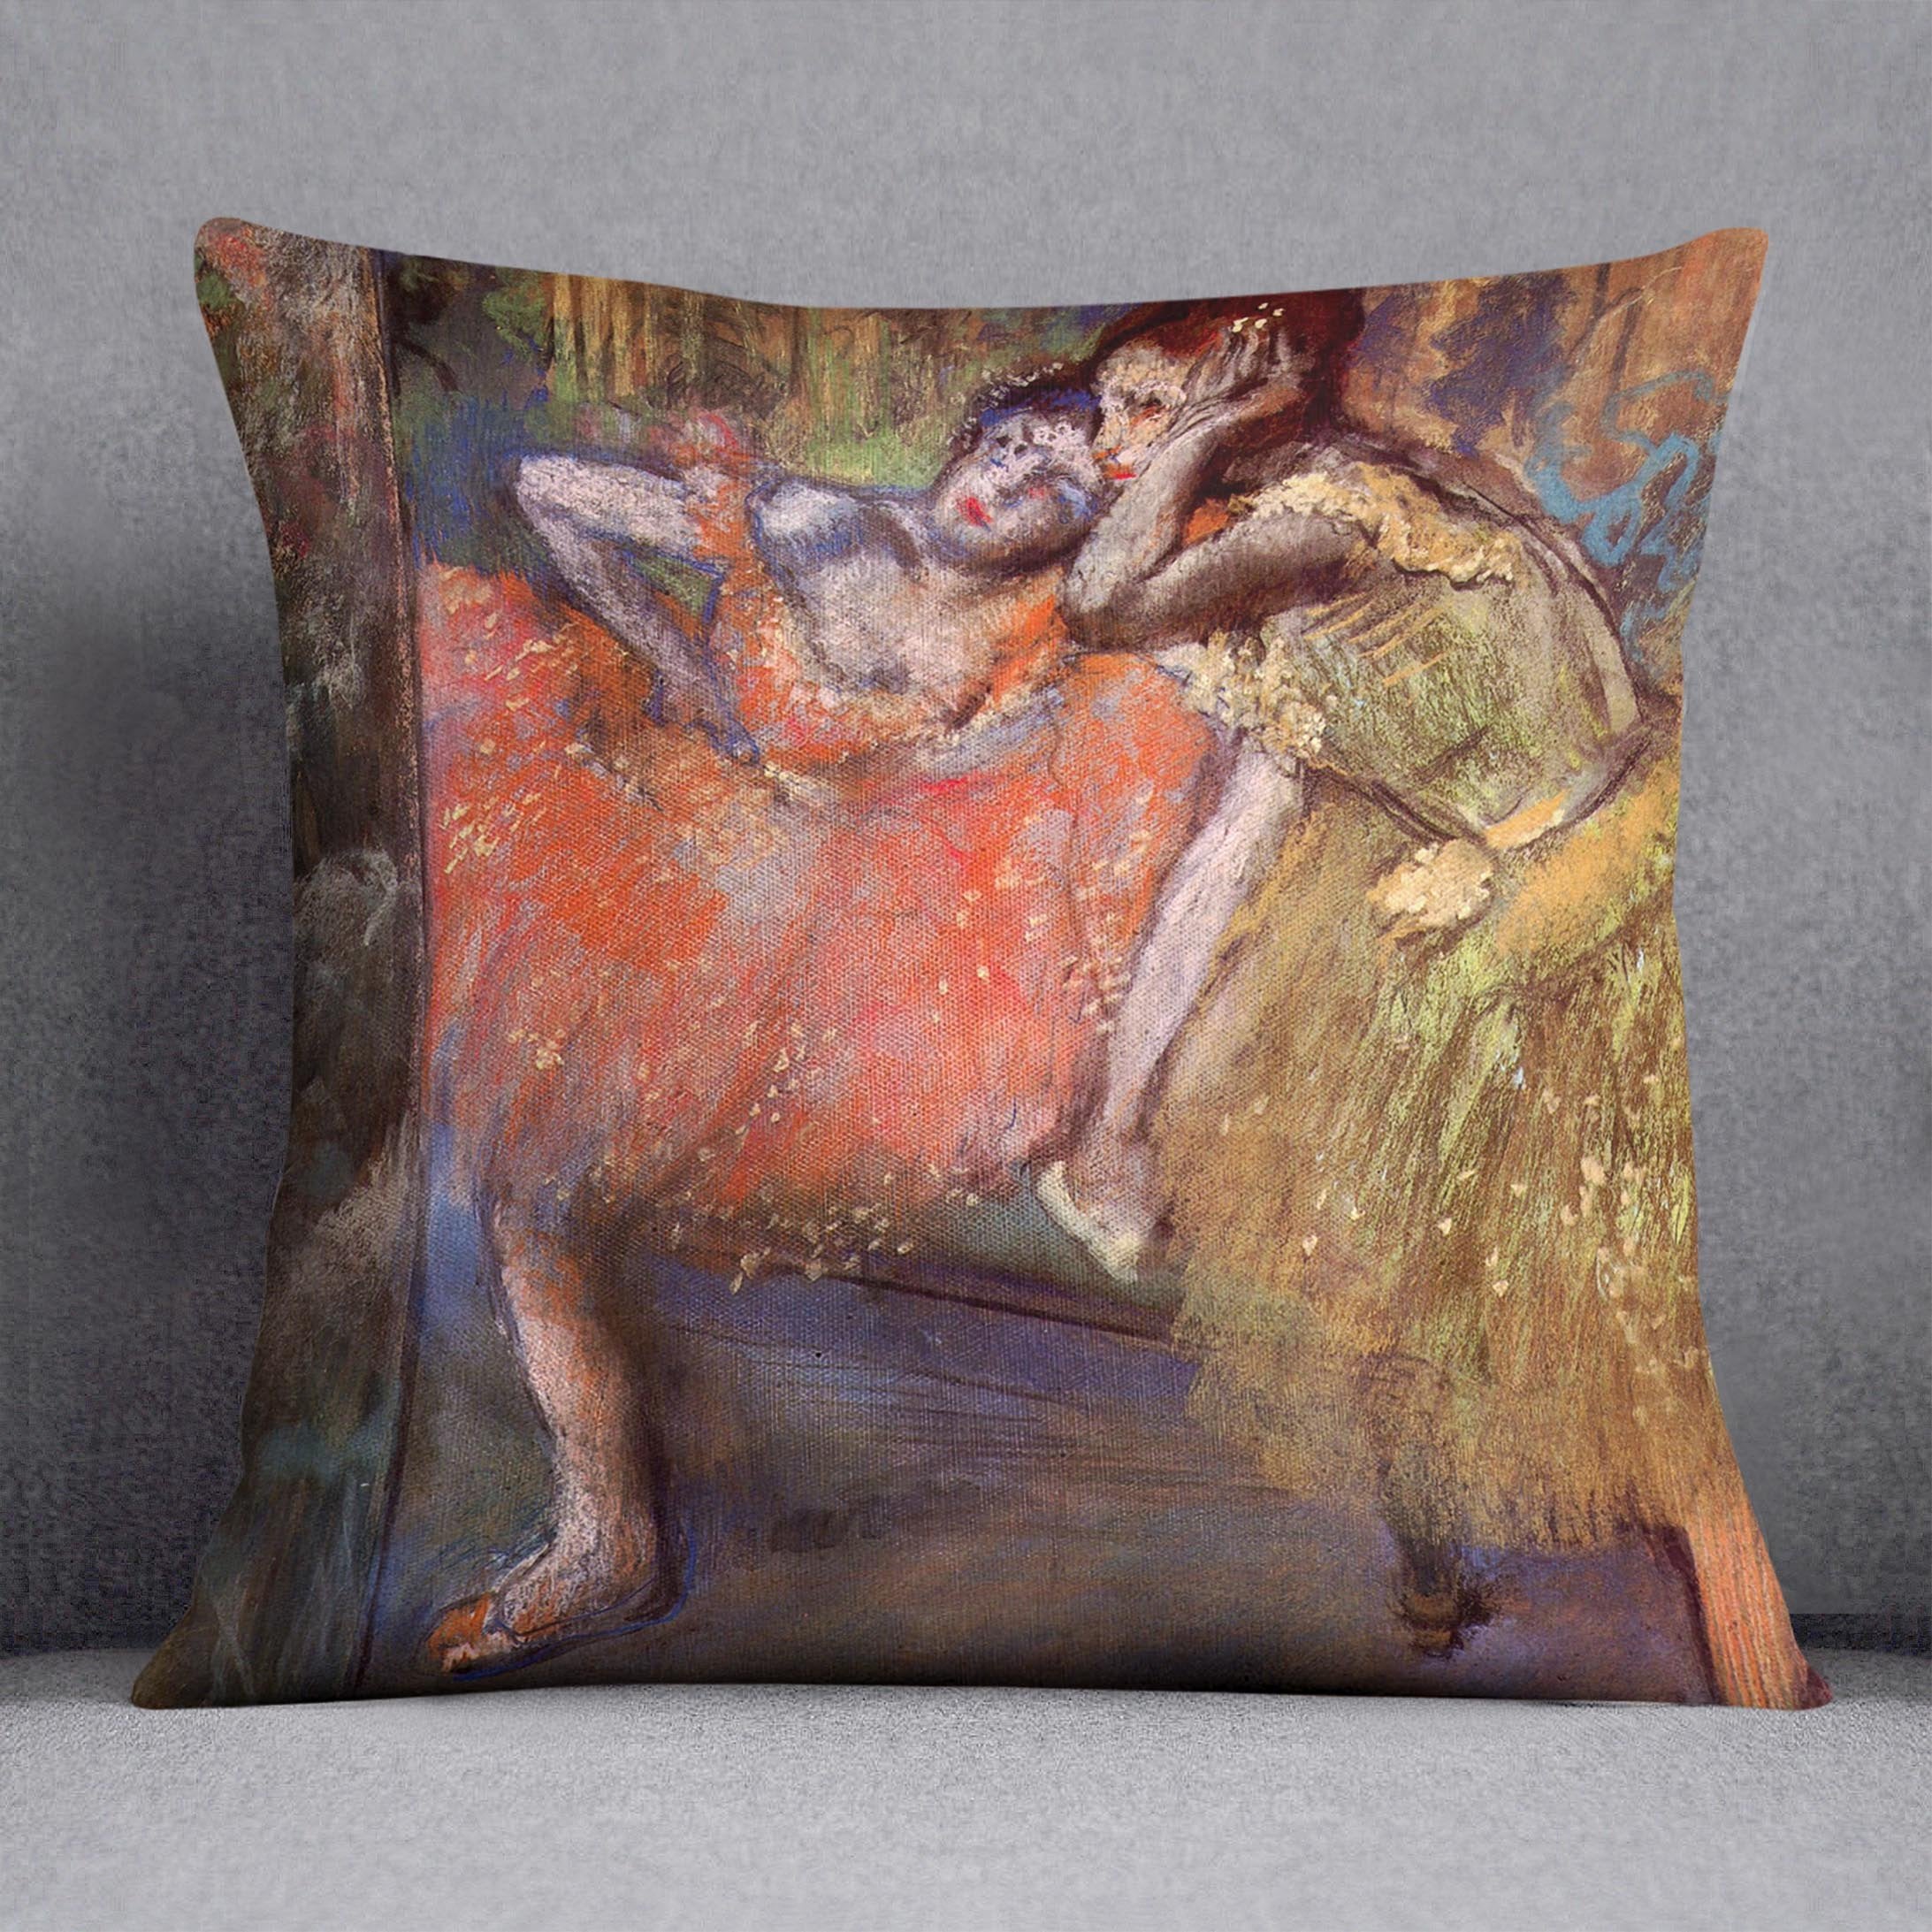 Two dancers behind the scenes by Degas Cushion